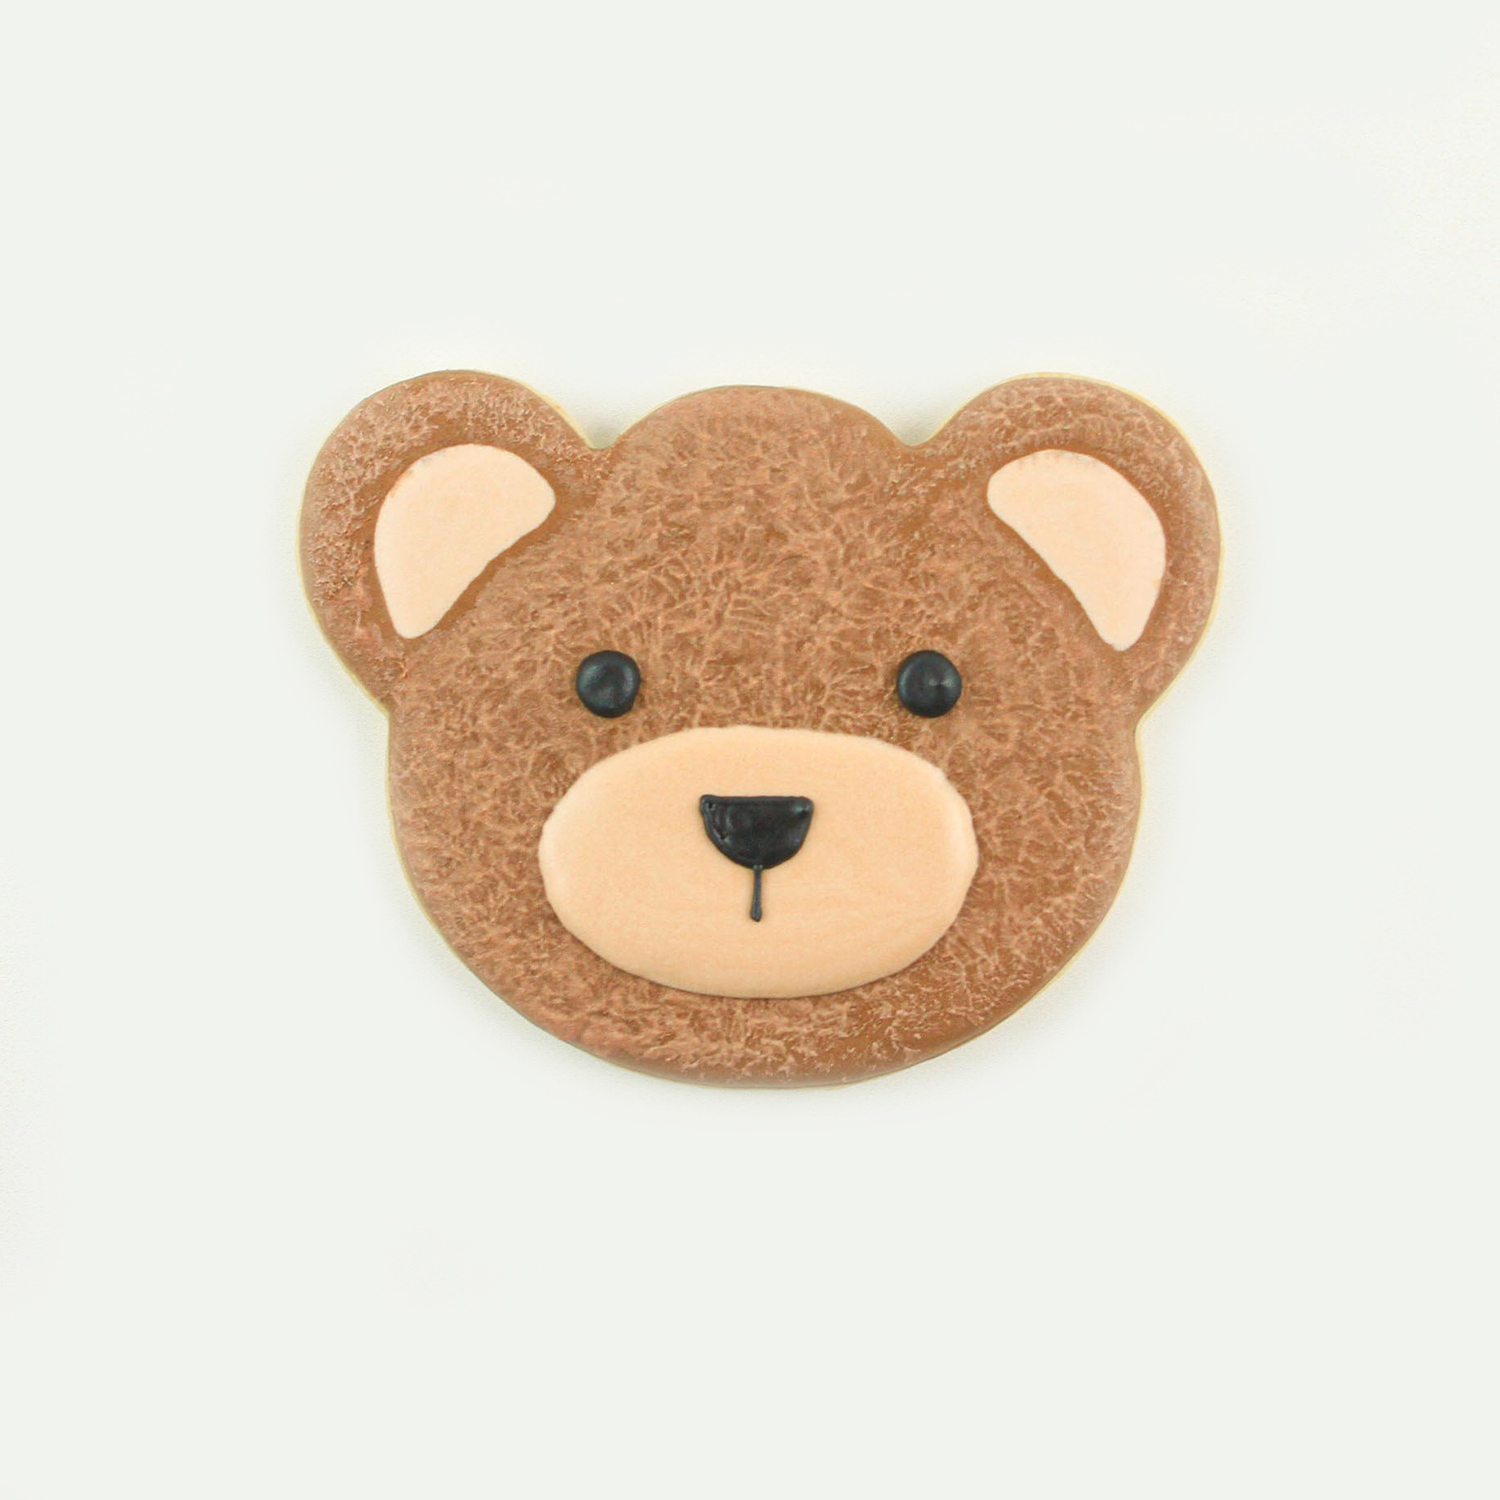 Bear face cookie in brown royal icing and with ivory icing dabbed all over face for a fur texture.